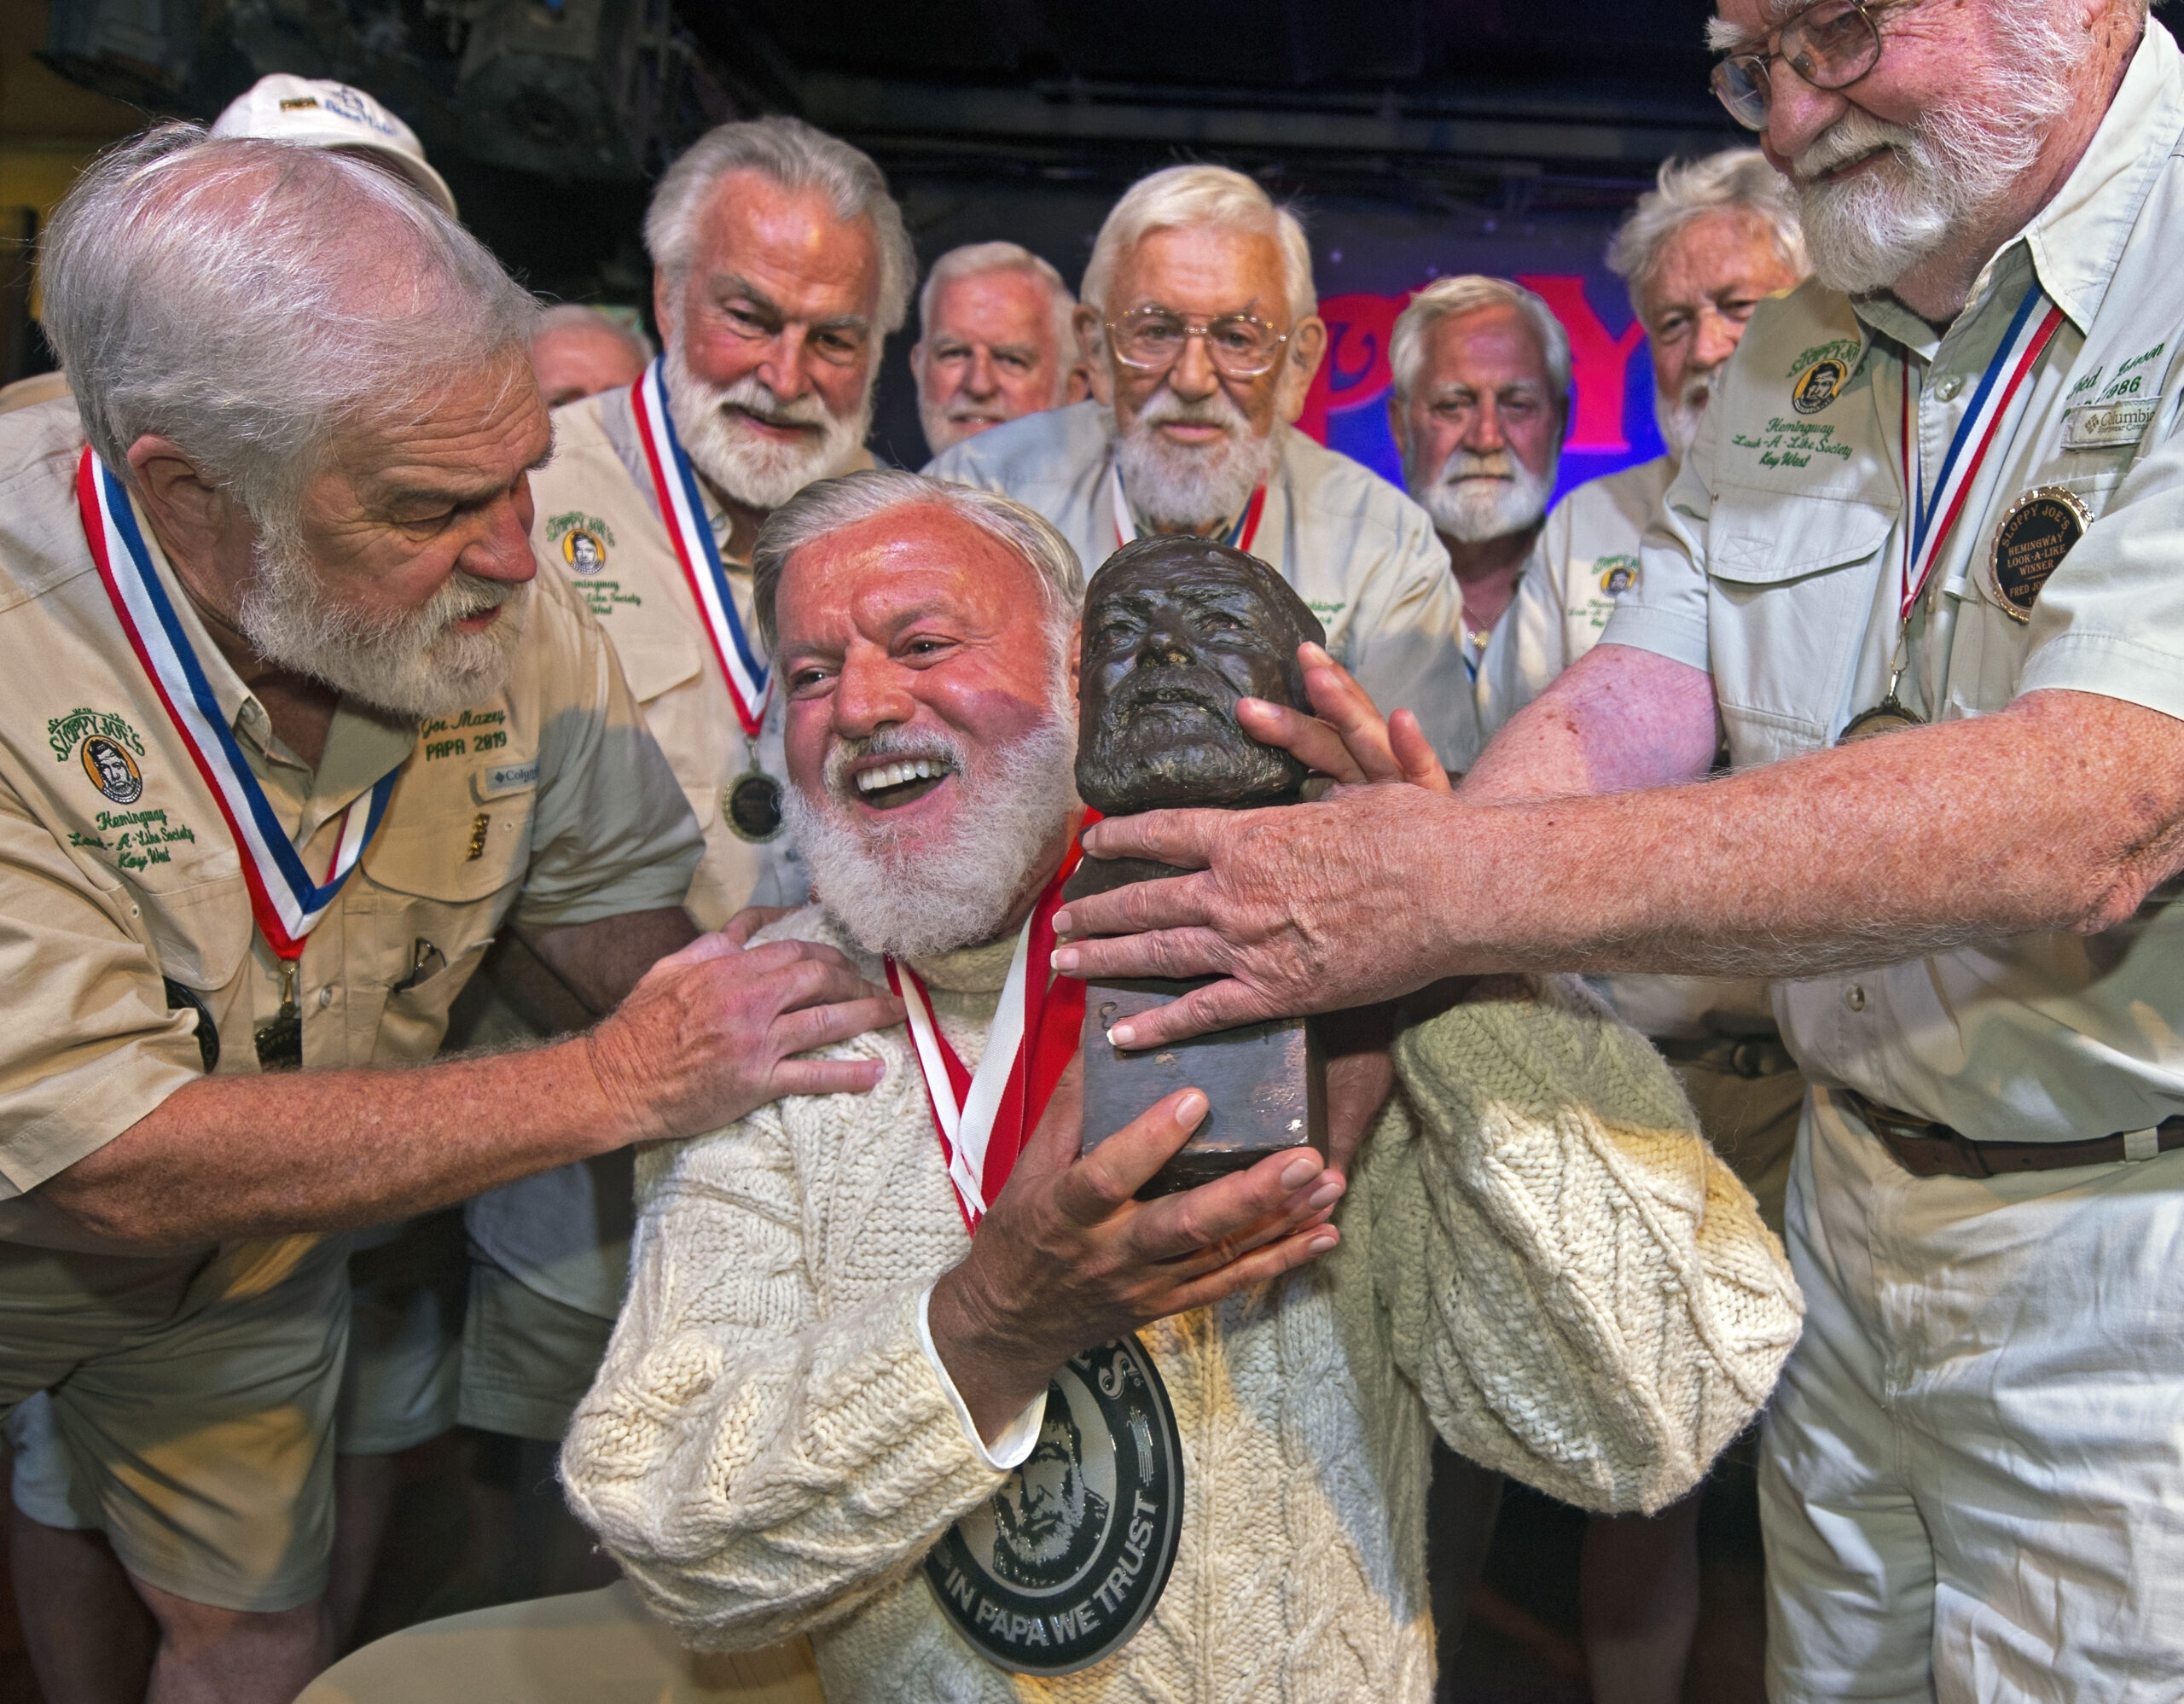 In this Saturday, July 23, 2022, photo provided by the Florida Keys News Bureau, Jon Auvil, center, receives an Ernest Hemingway bust and congratulations after he won the 2022 Hemingway Look-Alike Contest at Sloppy Joe's Bar in Key West, Fla. Left of Auvil is Joe Maxey, the 2019 winner, and at right is Fred Johnson, who won in 1986. Auvil, who finally won on his eighth attempt, beat 124 other entrants in the contest that was the highlight event of Key West's annual Hemingway Days festival that ends Sunday, July 24. Hemingway lived and wrote in Key West during most of the 1930s. (Andy Newman/Florida Keys News Bureau via AP)